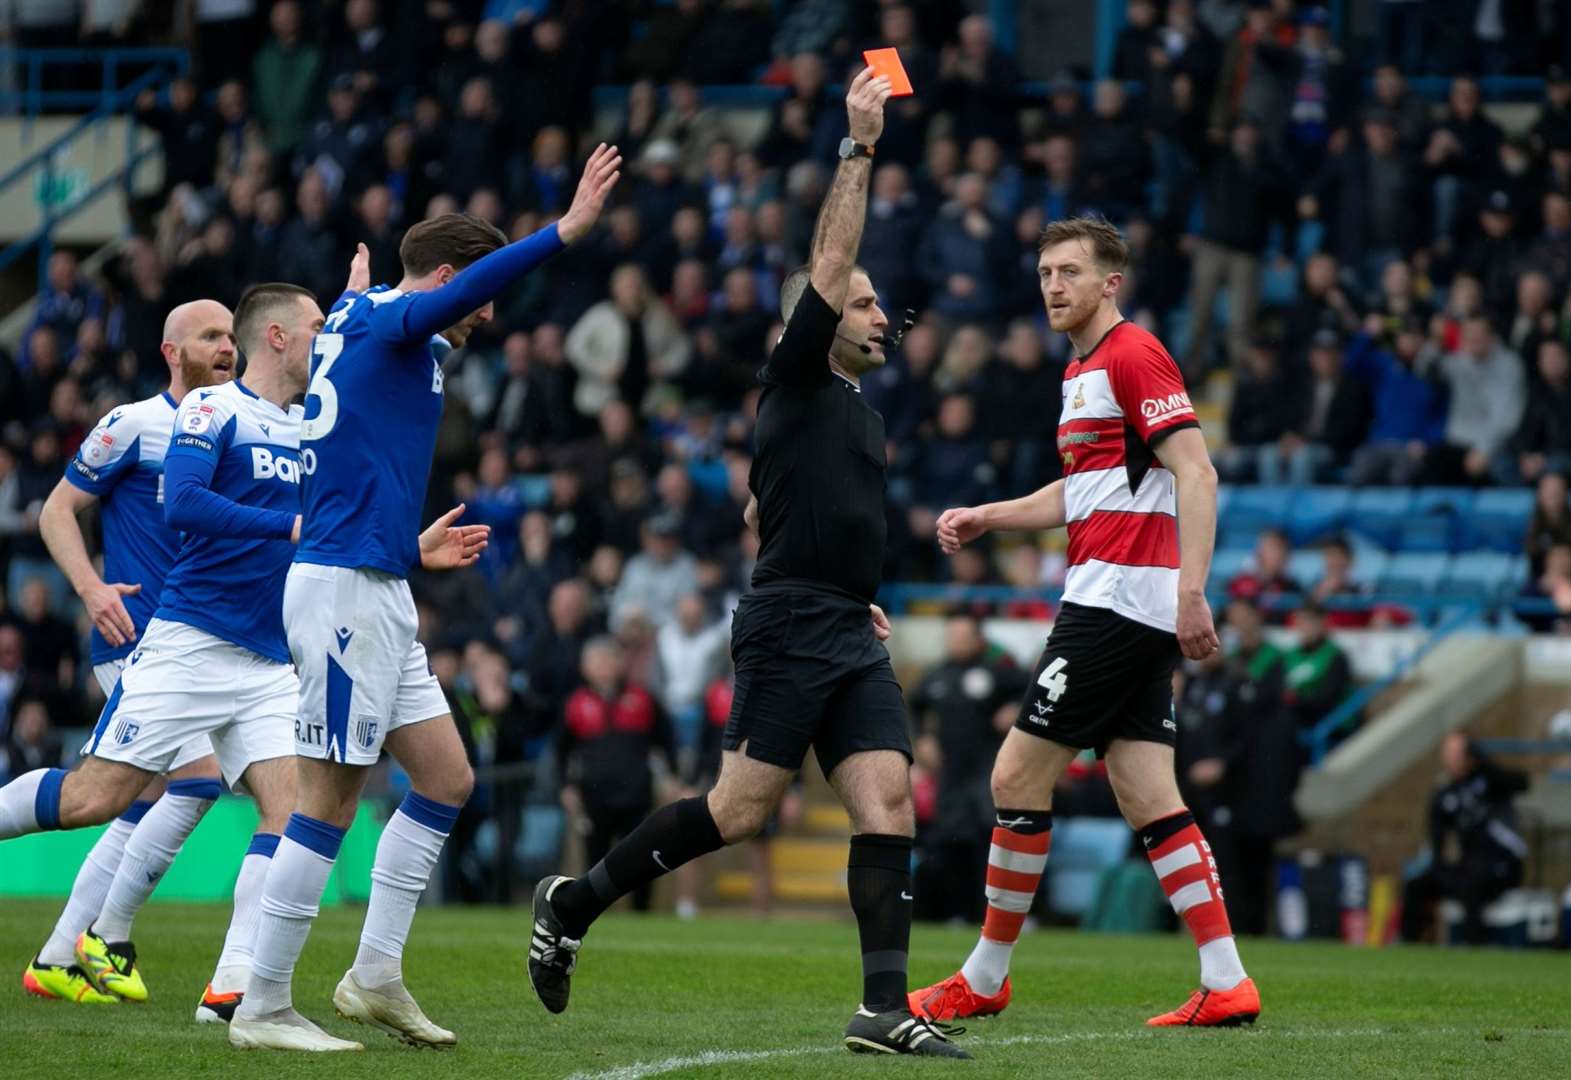 Referee Alex Chilowicz sends off Doncaster keeper Thimothee Lo-Tutala in the second half at Priestfield Picture: @Julian_KPI